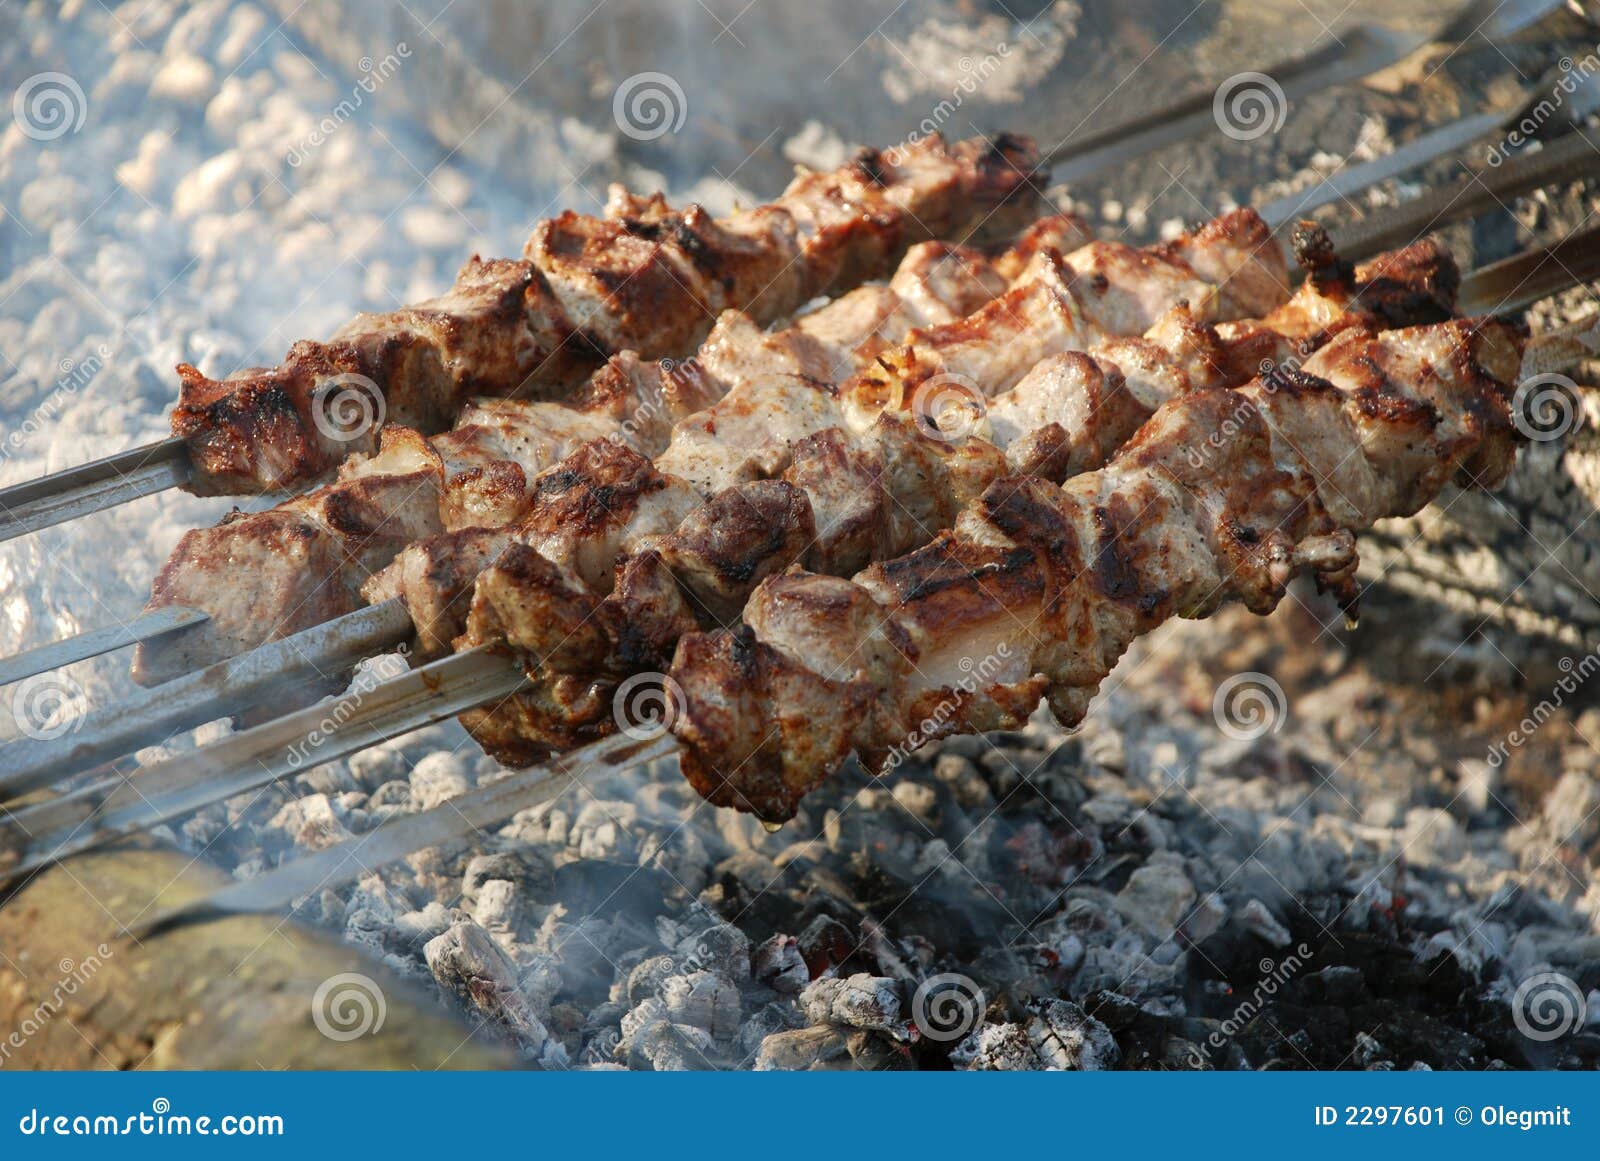 Grilled on fire meat stock image. Image of flame, smoke - 2297601